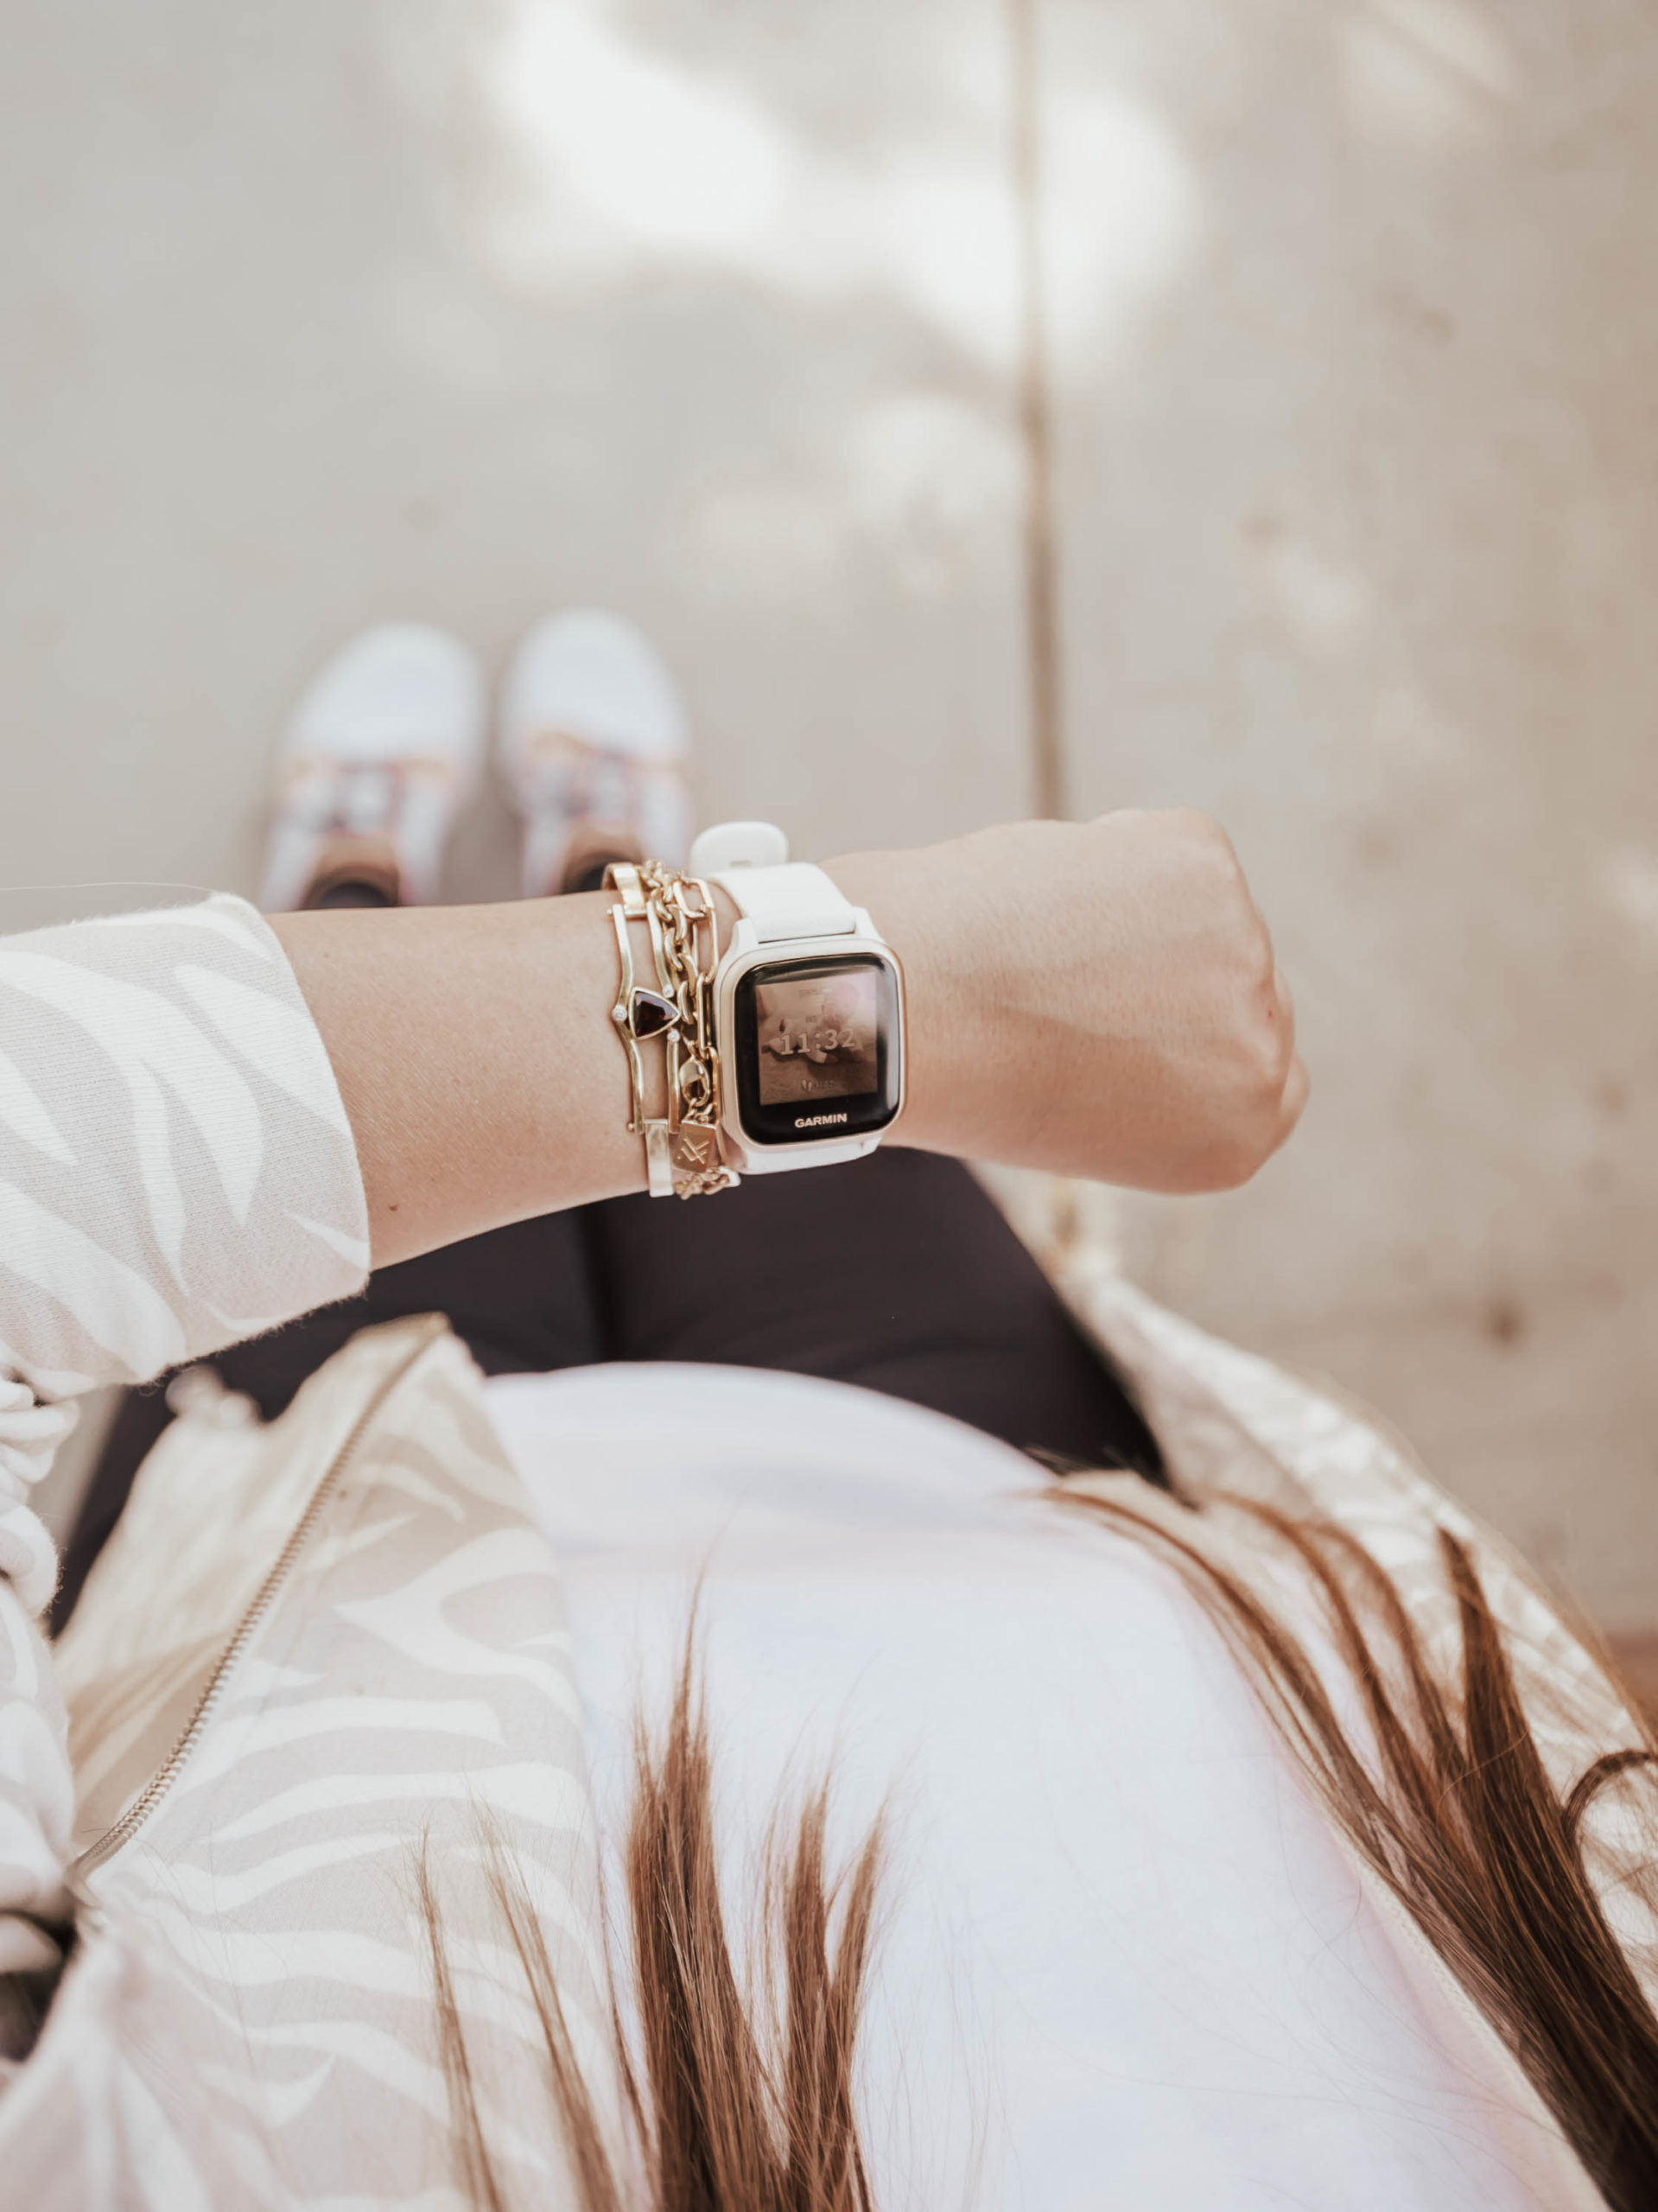 Reno blogger, Ashley Zeal Hurd from The Ashley and Emily blog shares how she is having a healthy pregnancy with Garmin.